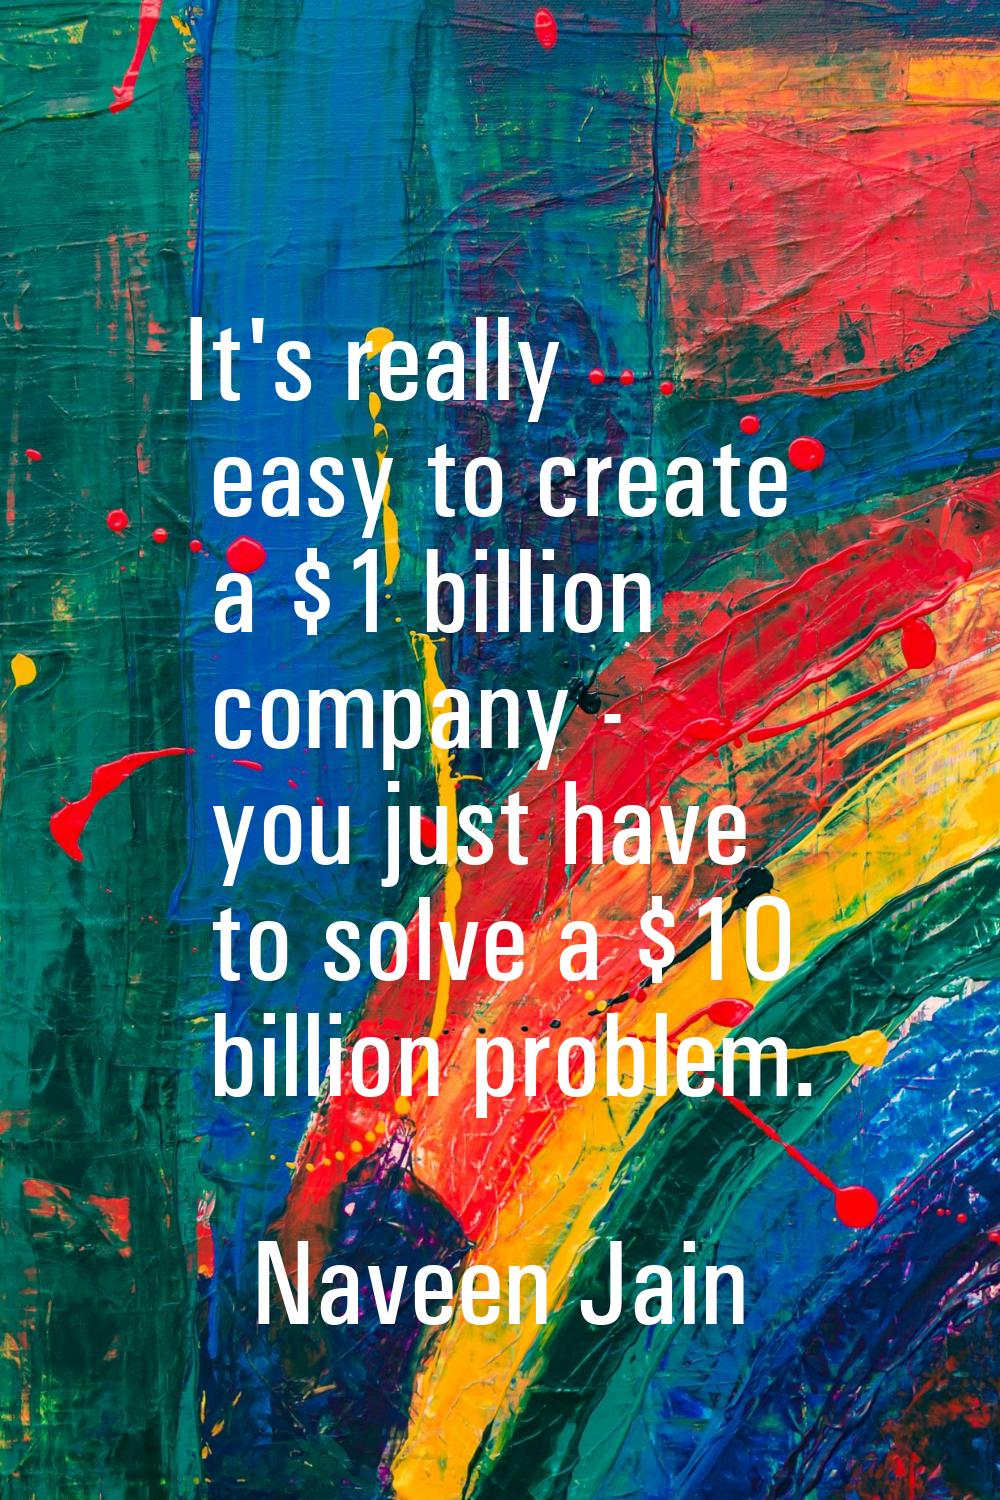 It's really easy to create a $1 billion company - you just have to solve a $10 billion problem.